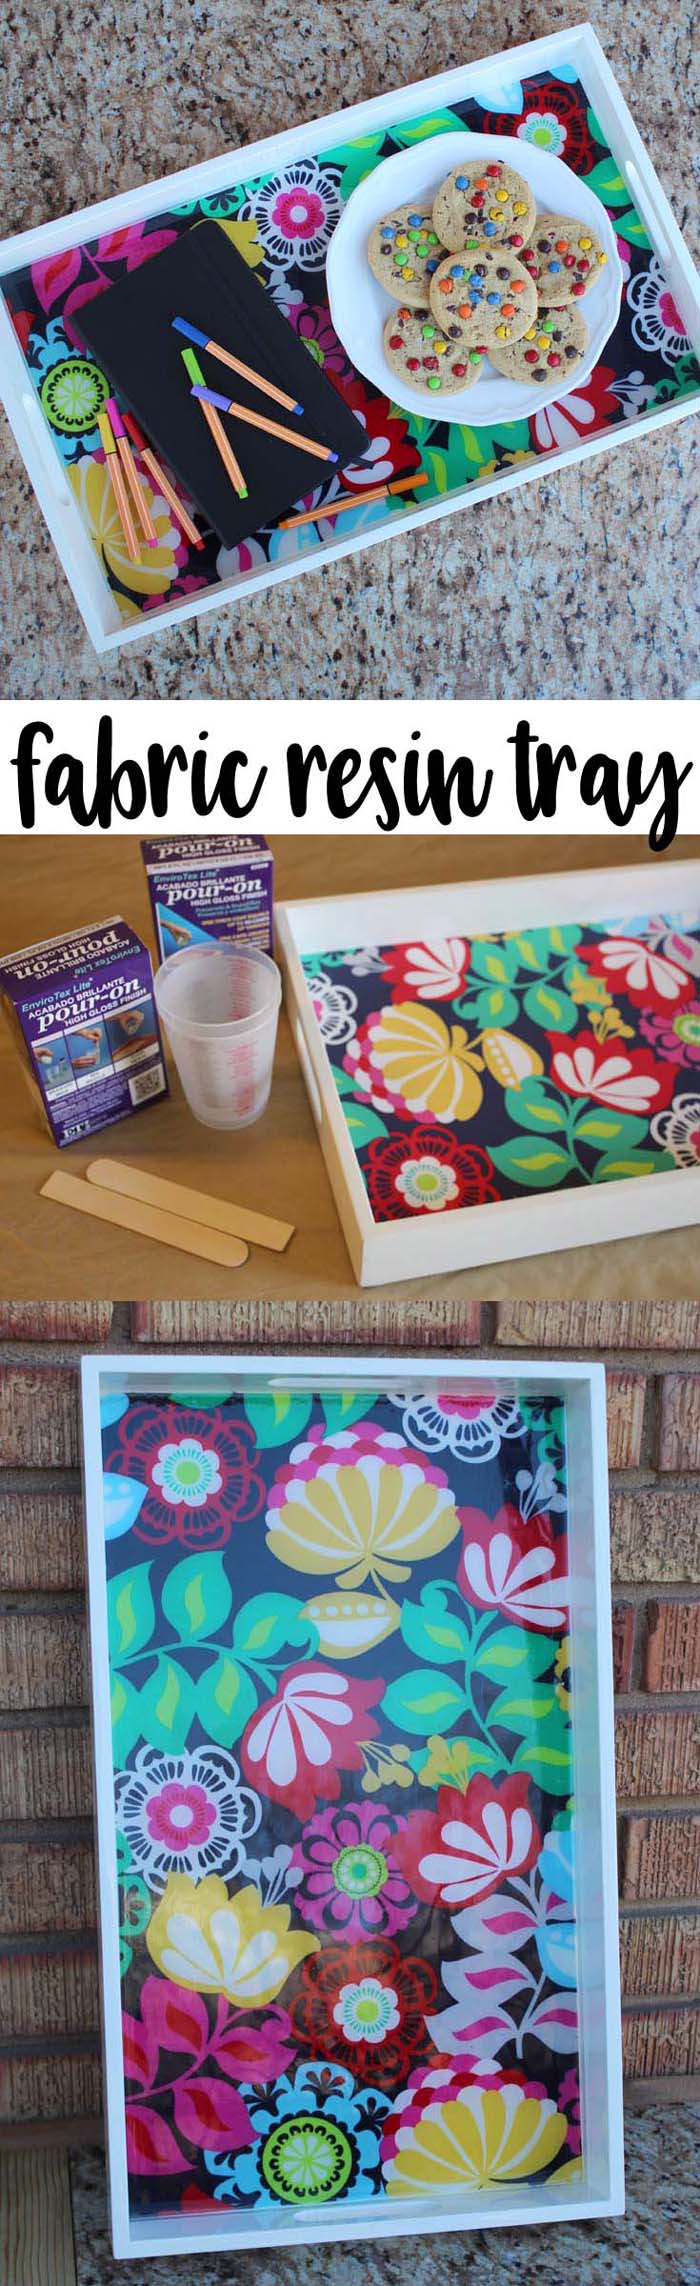 Make a stunning serving tray with colorful fabric and high gloss resin, perfect for any occasion!   via @resincraftsblog